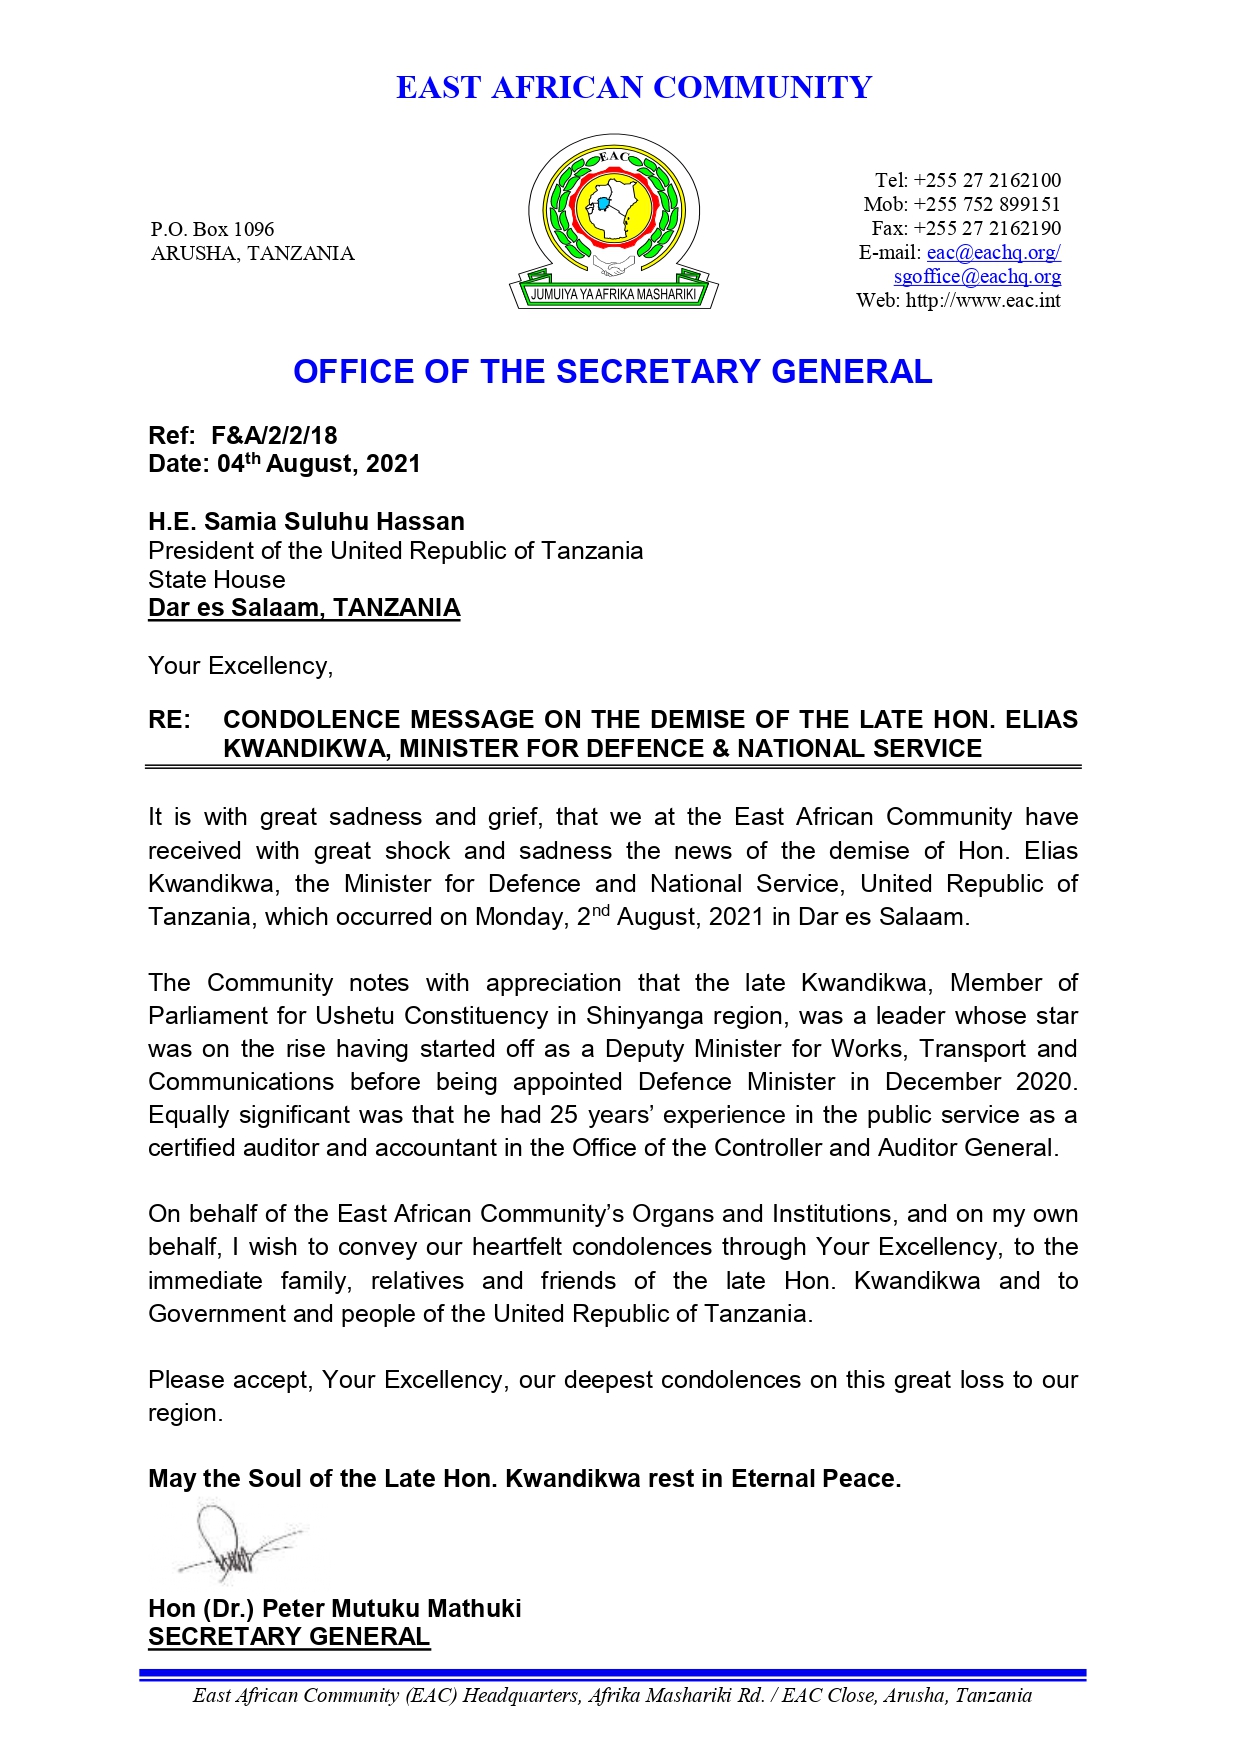 CONDOLENCE MESSAGE ON THE DEMISE OF HON. ELIAS KWANDIKWA MINISTER OF DEFENCE NATIONAL SERVICE